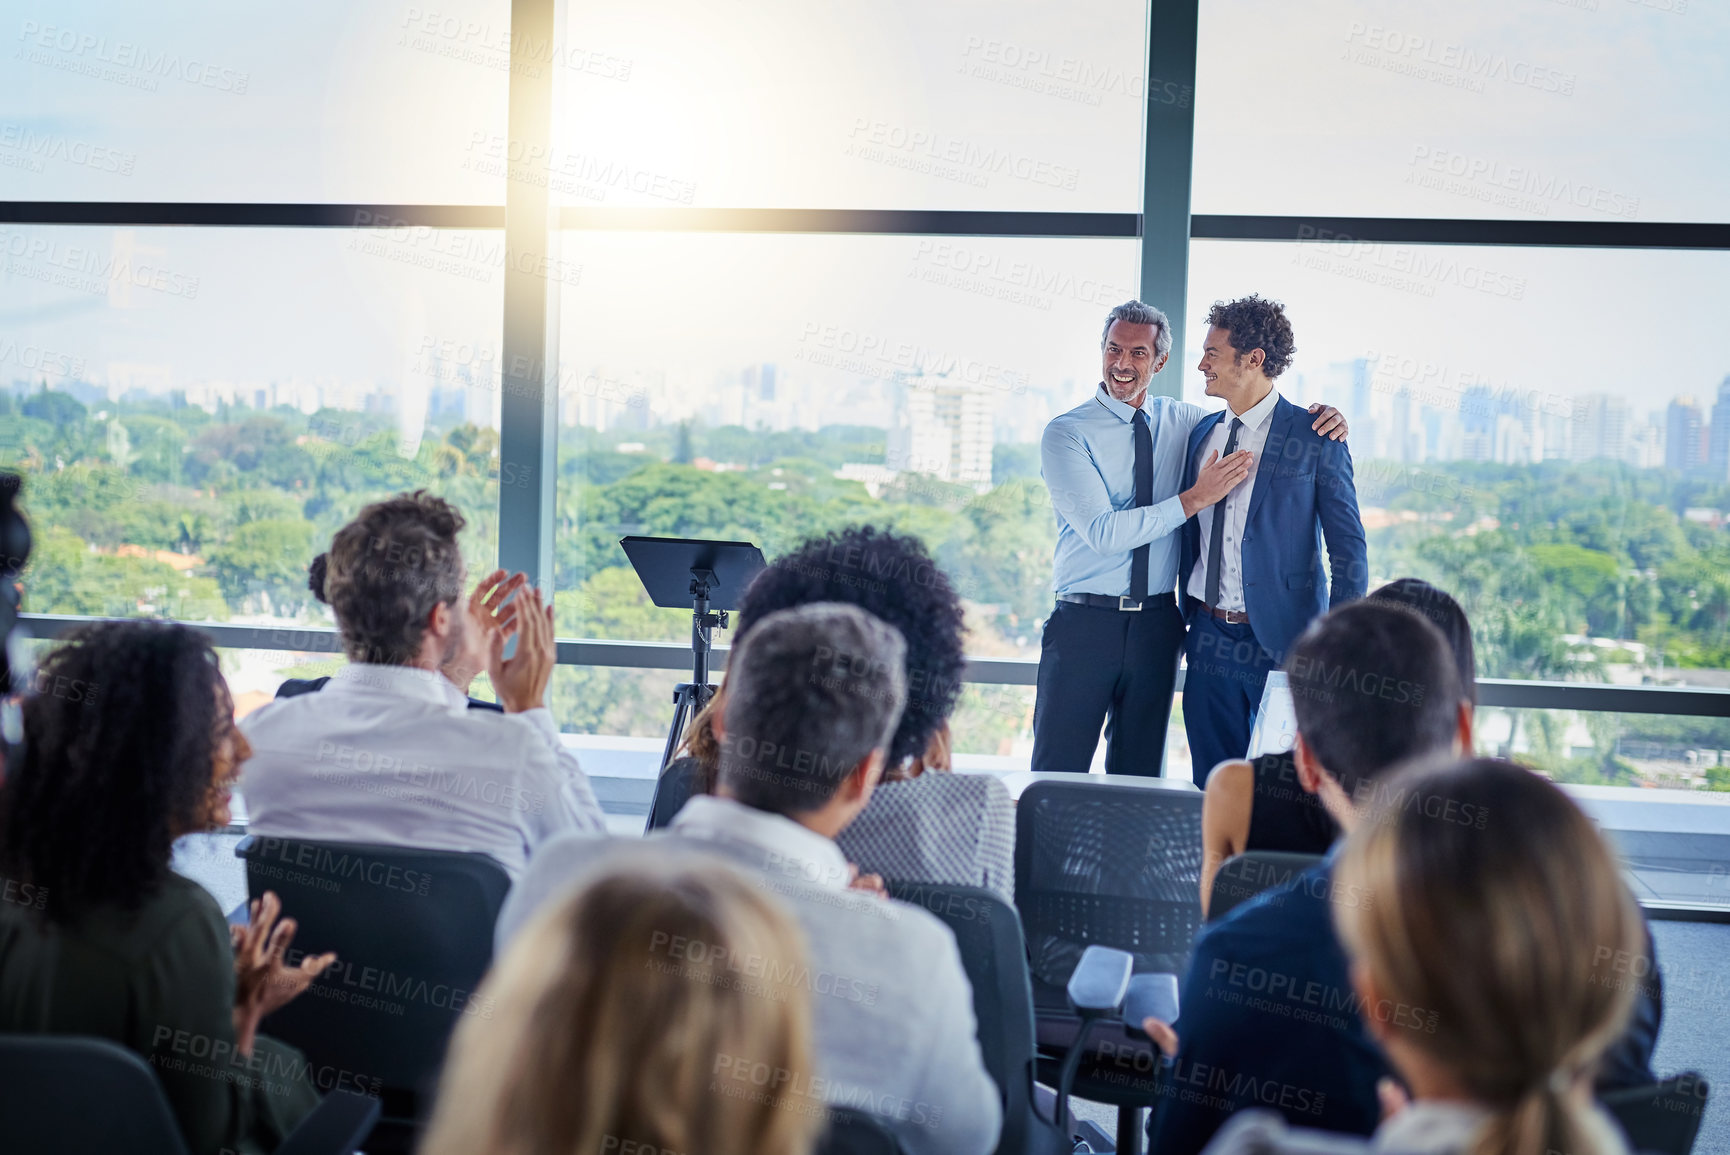 Buy stock photo Professional, presentation and applause during a seminar at the workplace with people in the audience. Business, employees and congratulations during conference for awards in career at the office.